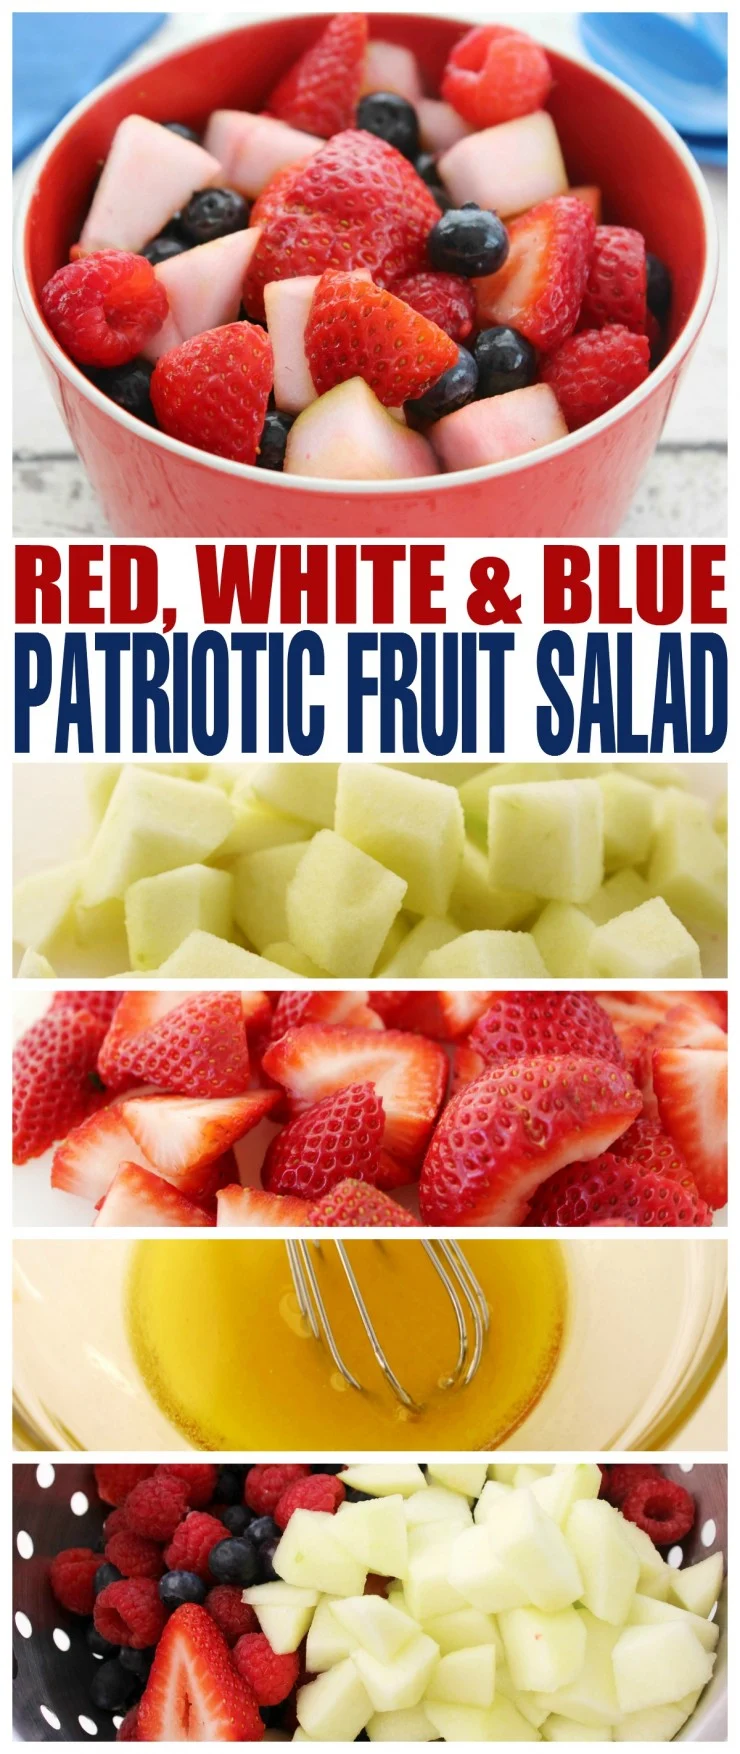 If you are planning a patriotic celebration for memorial day or the 4th of July, consider serving up this delicious patriotic fruit salad. 